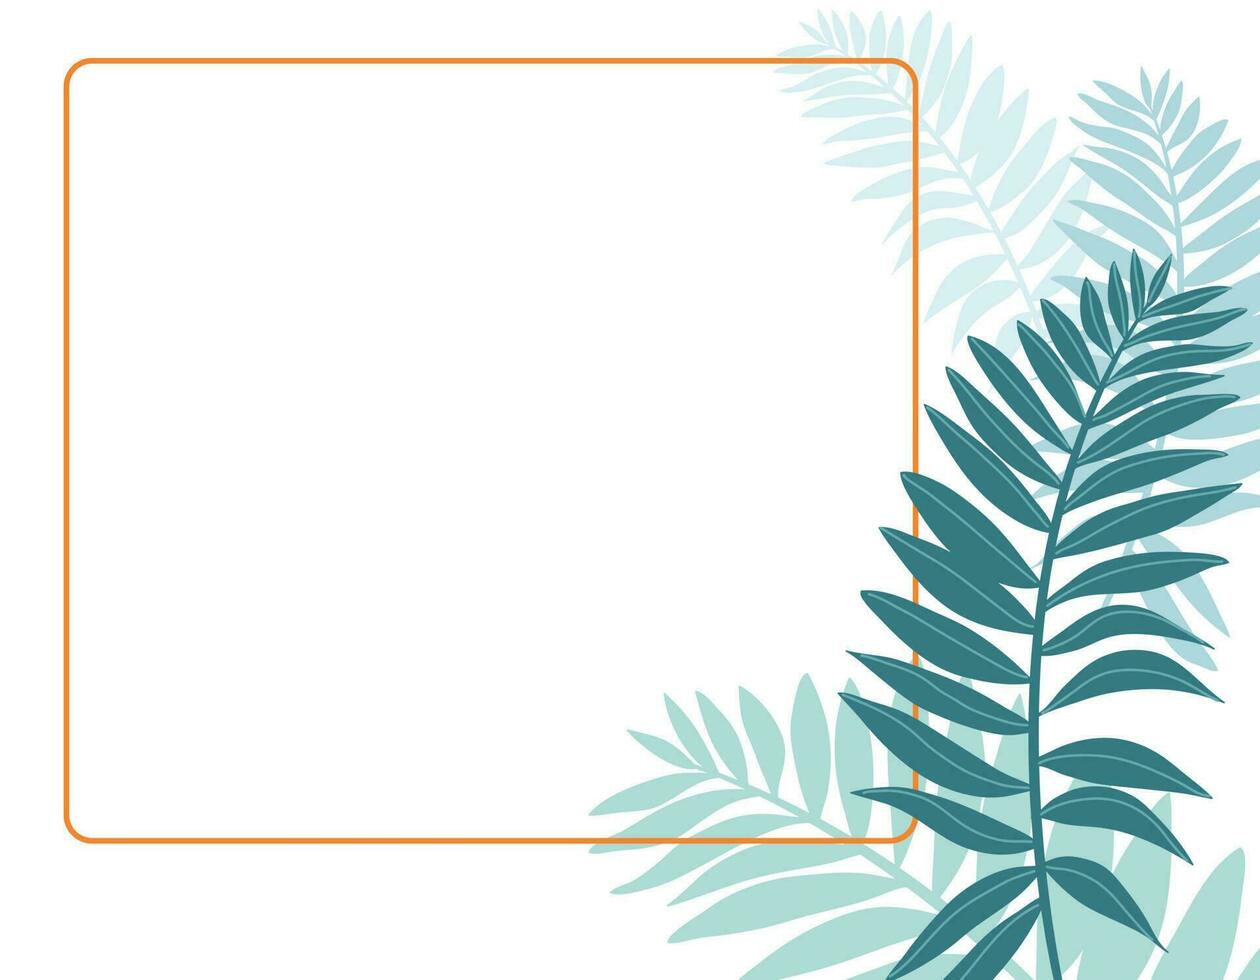 Tropical palm leaf summer plant tropical with horizontal frame banner. Room for text, copy, lettering. Vector design illustration.